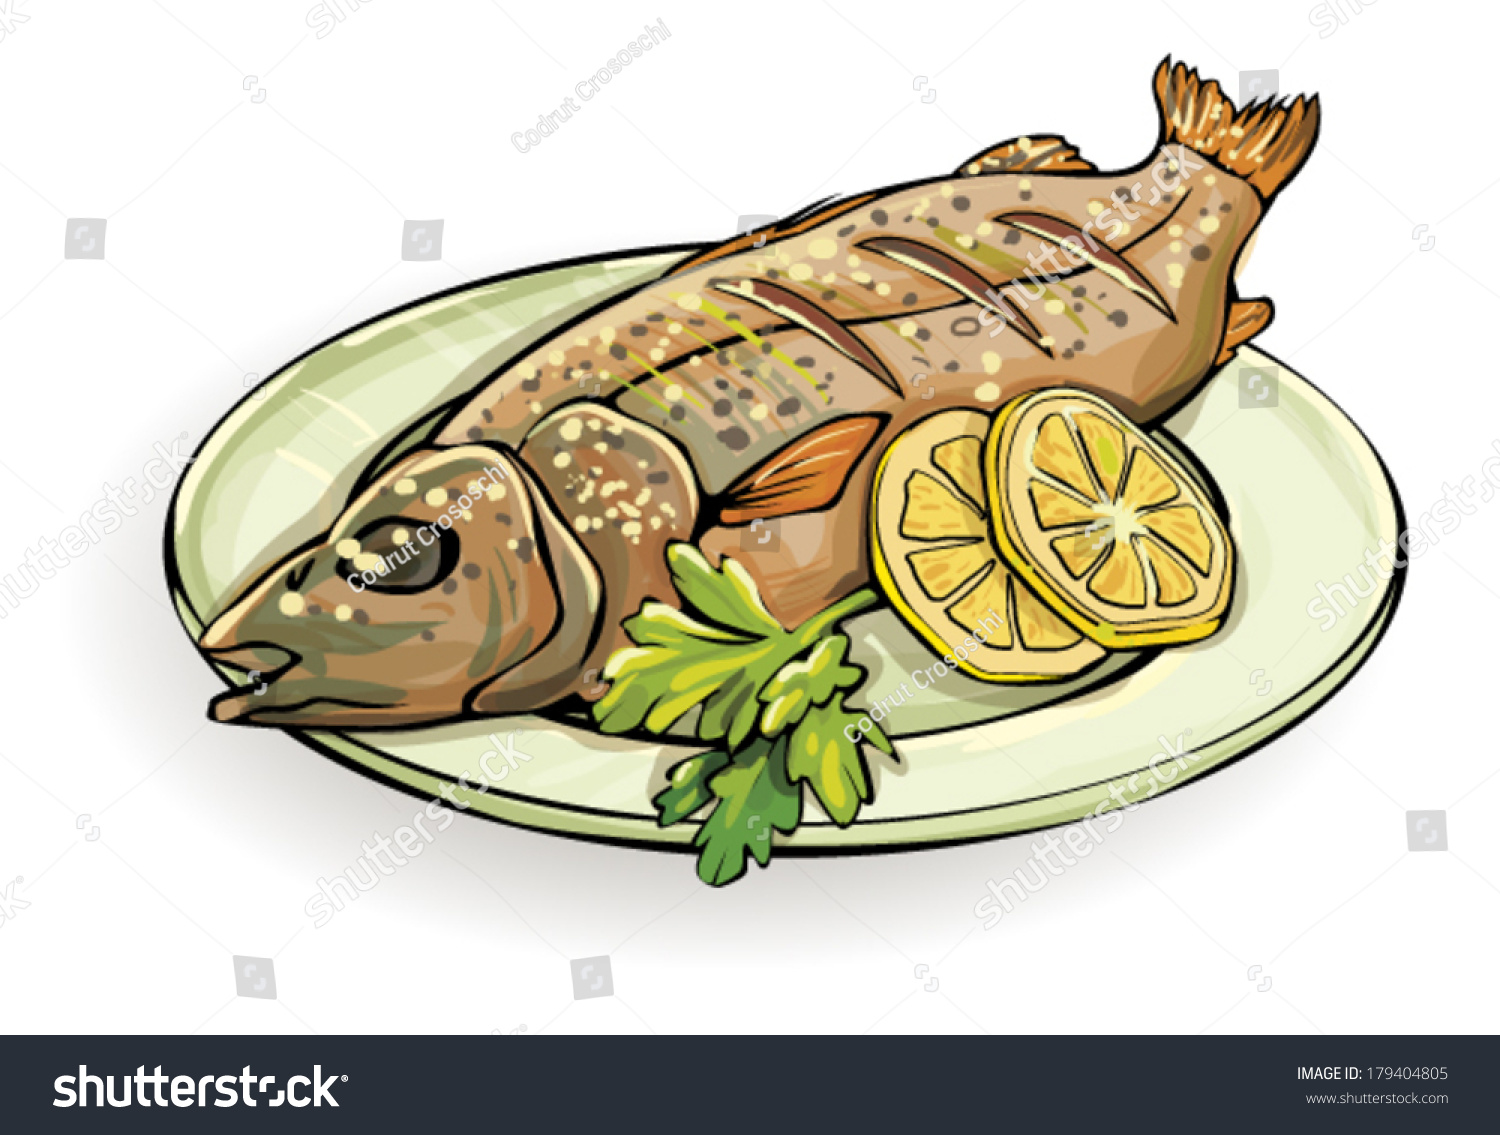 Cooked Fish Stock Vector (Royalty Free) 179404805